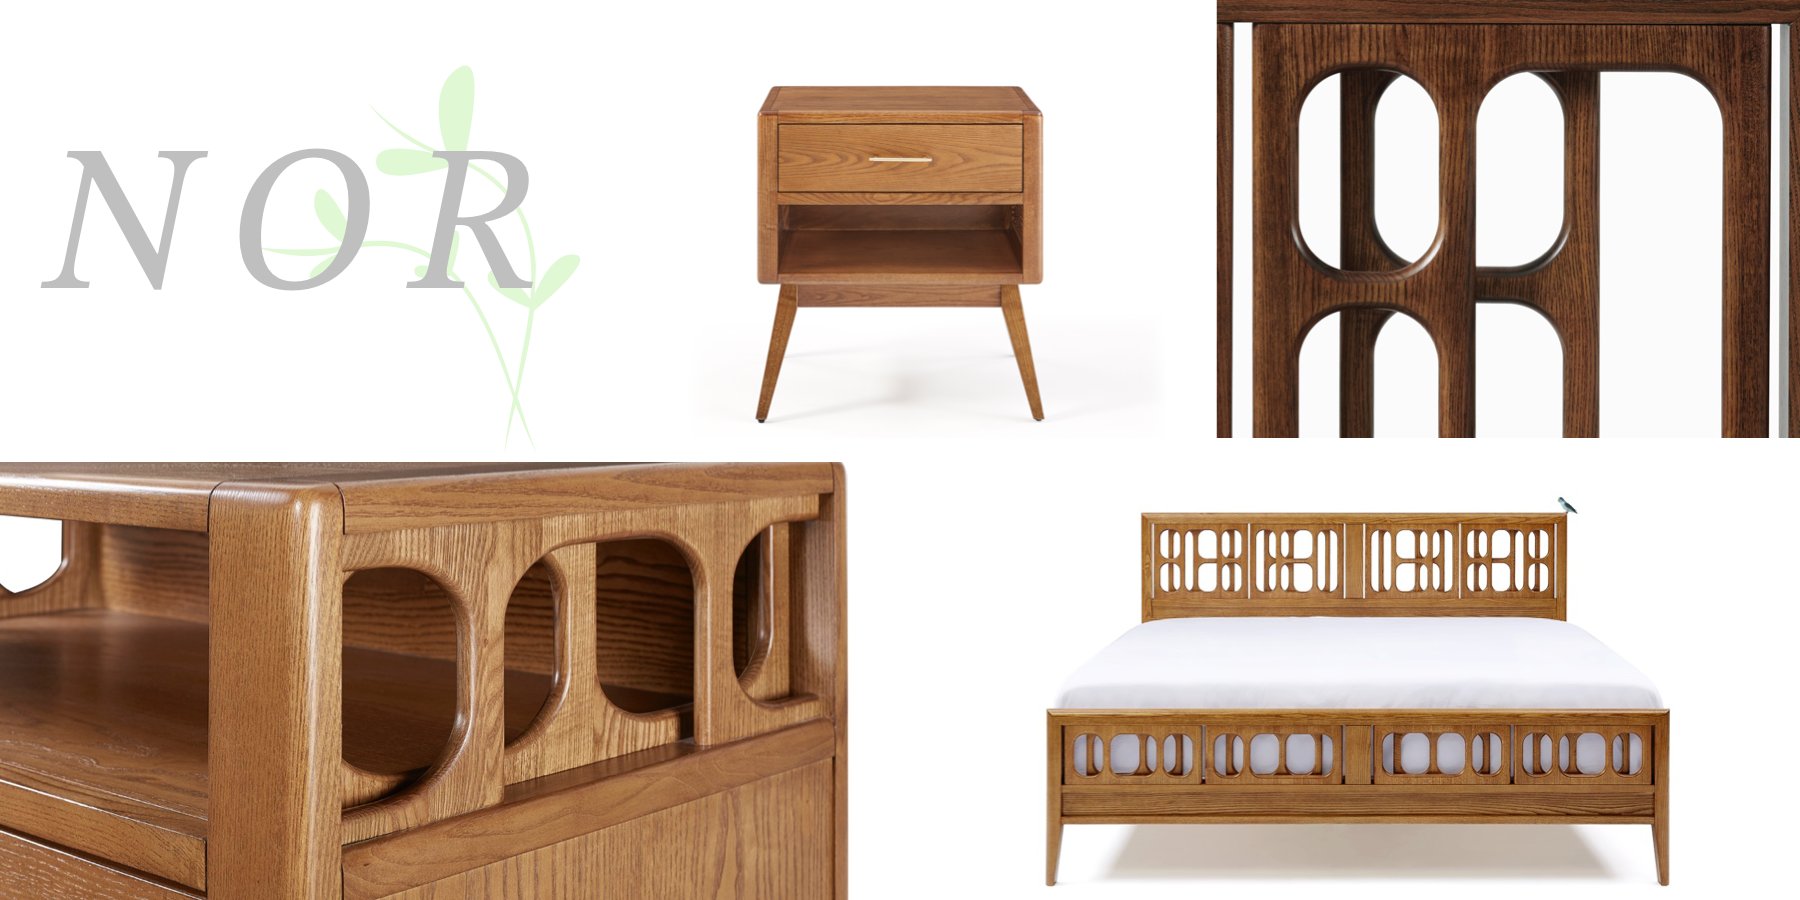 NOR midcentury biomorphic modern furniture collection